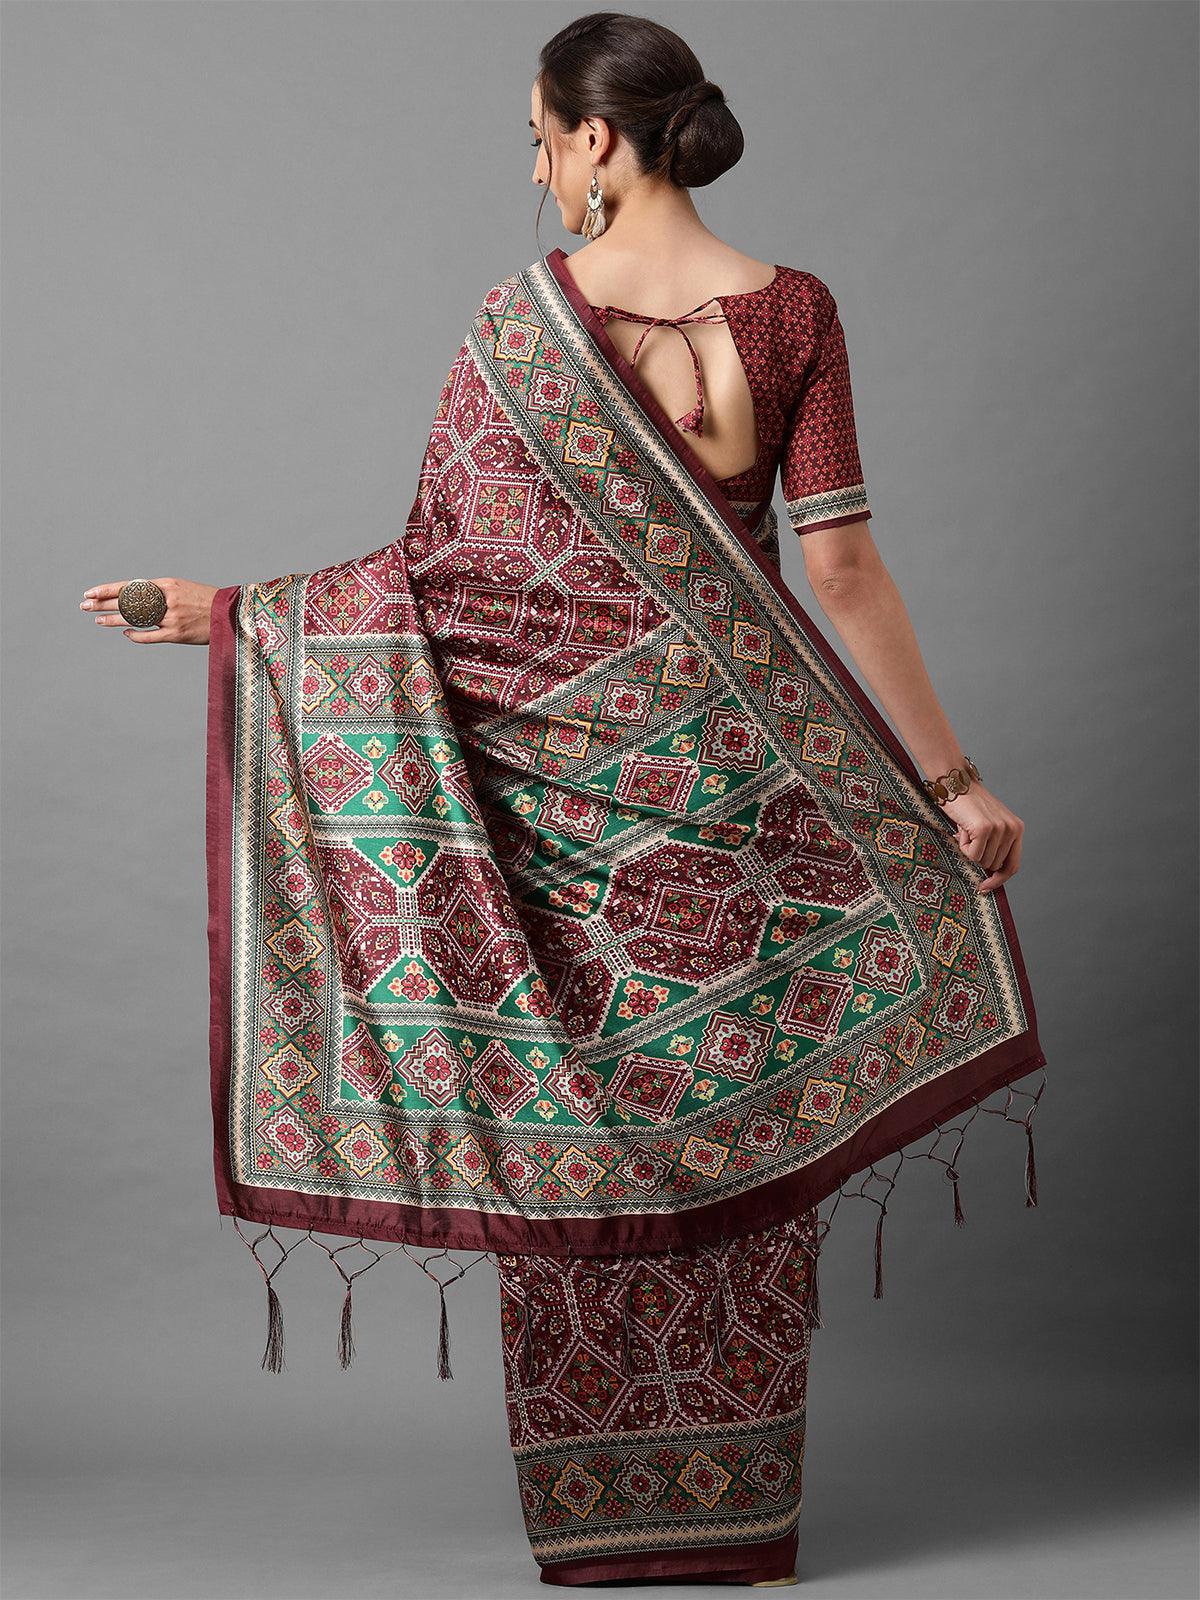 Maroon Festive Patola Silk Patola Saree With Unstitched Blouse - Odette